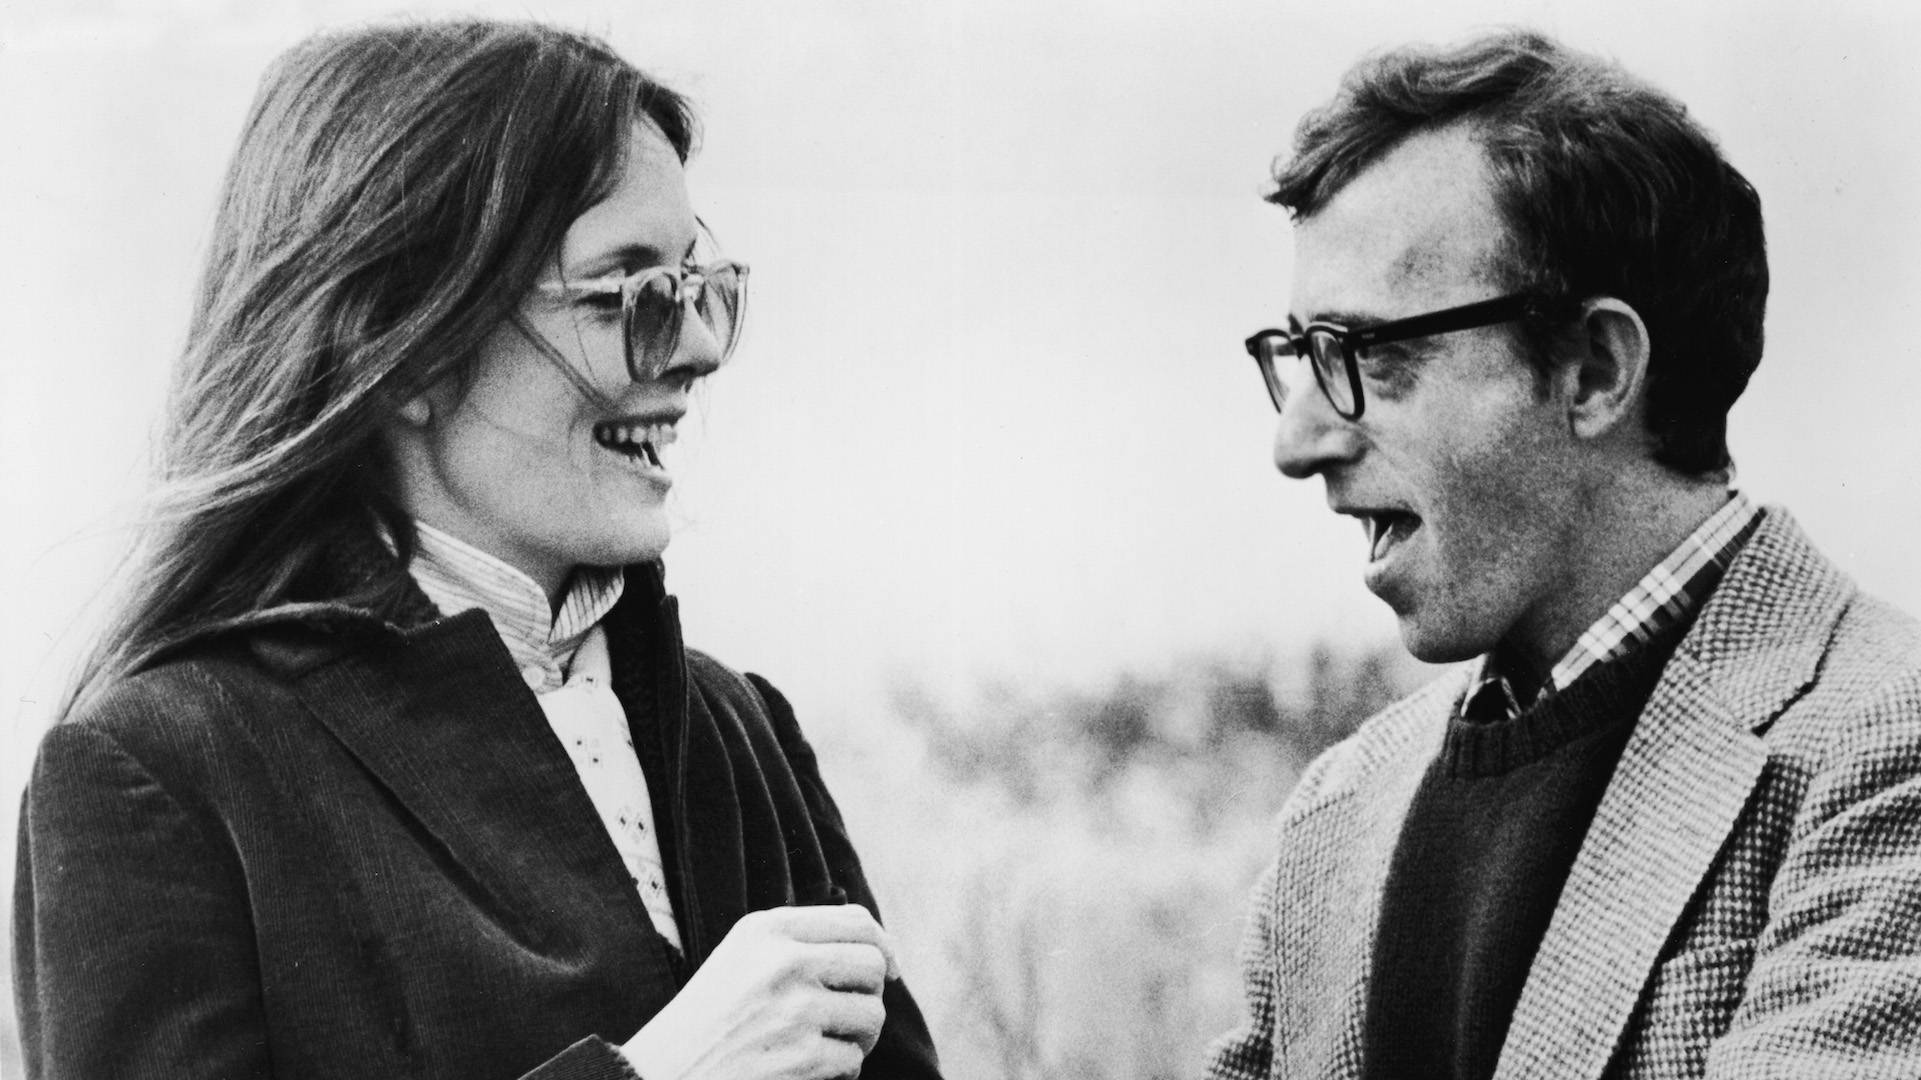 American actress Diane Keaton and American film director and actor Woody Allen talk in still from the film 'Annie Hall,' written and directed by Allen, 1977. (Photo by United Artists/Courtesy of Getty Images)